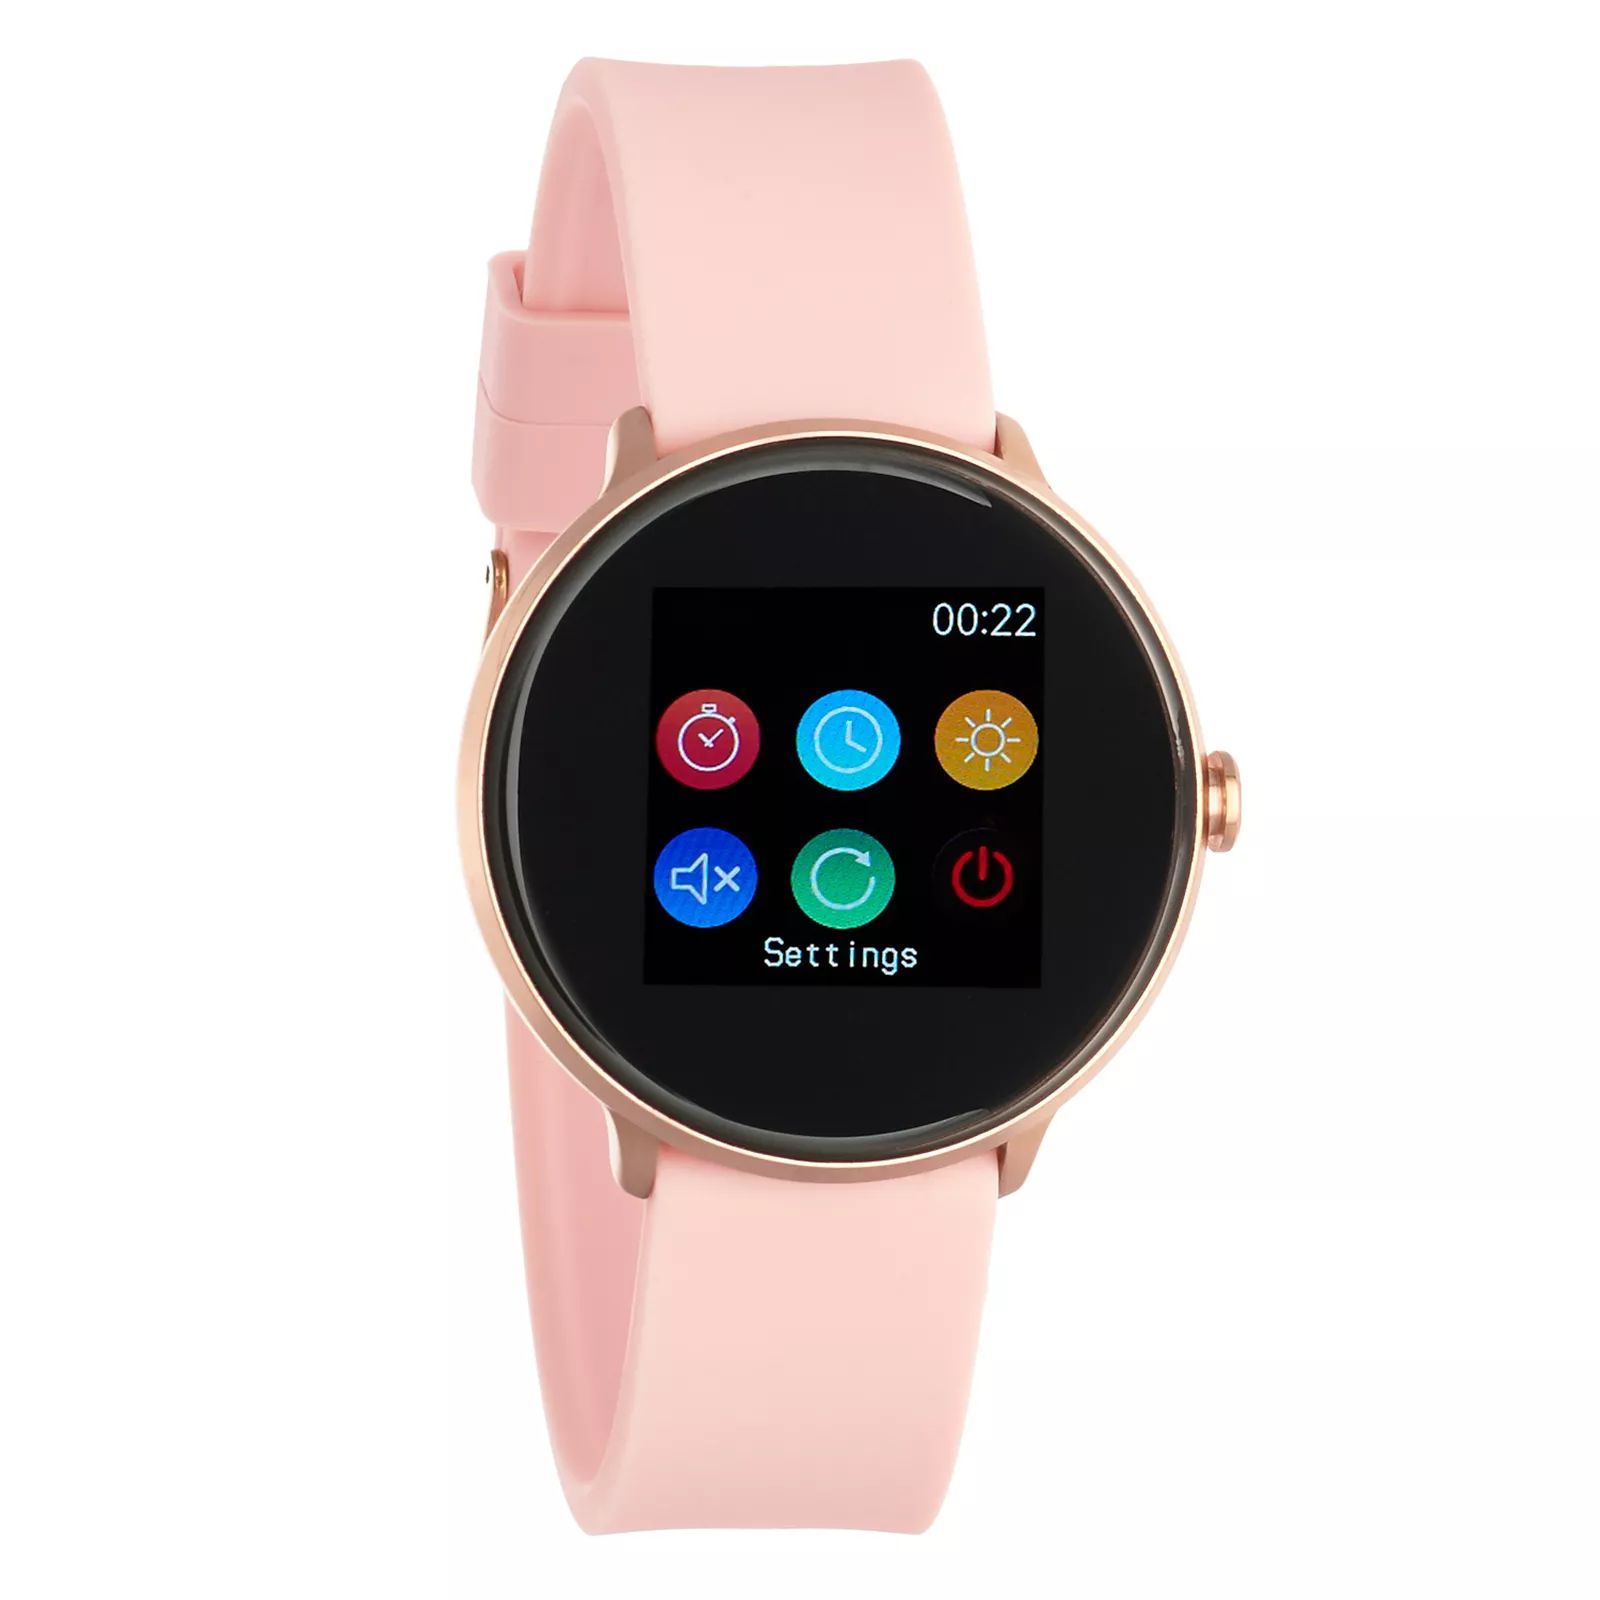 iTouch Sport Smart Watch - Silicone Band, Size: Large, Pink | Kohl's